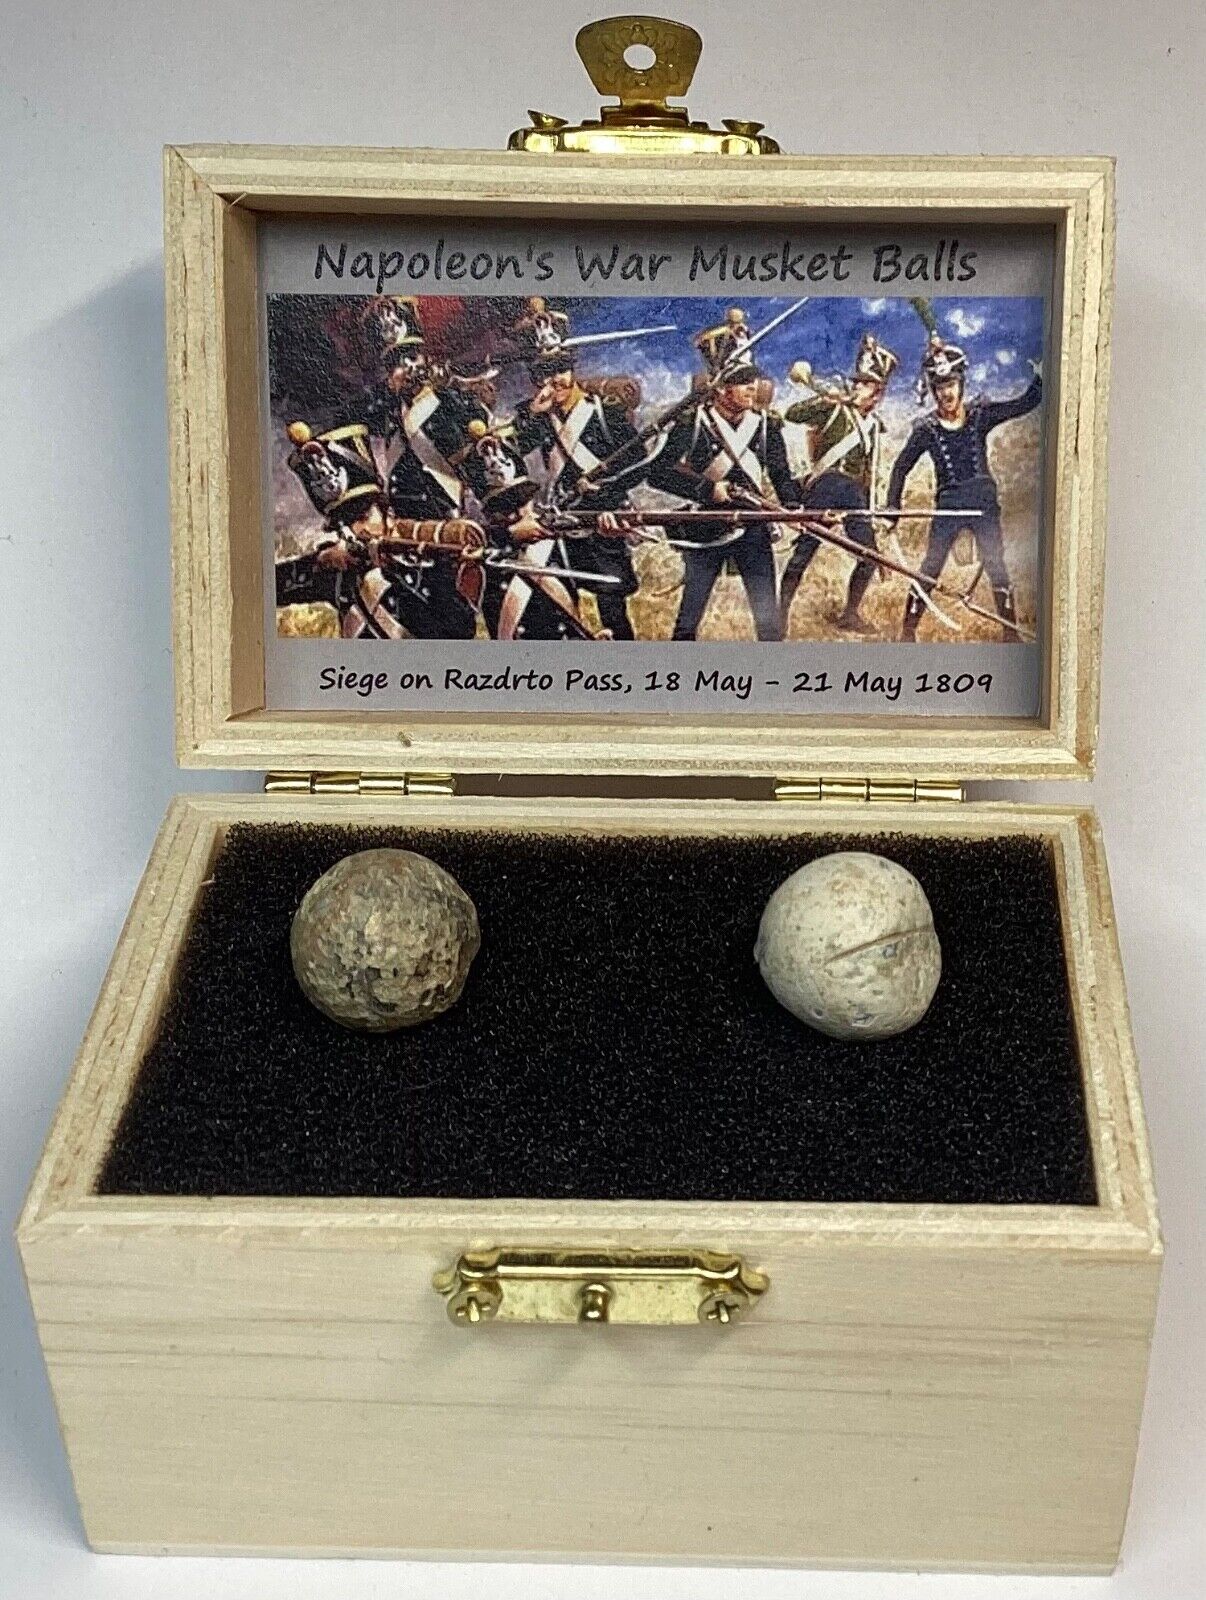 FRANCE, NAPOLEONIC WARS, SET OF ORIGINAL,AUTHENTIC MUSKET BALLS FROM BATTLEFIELD